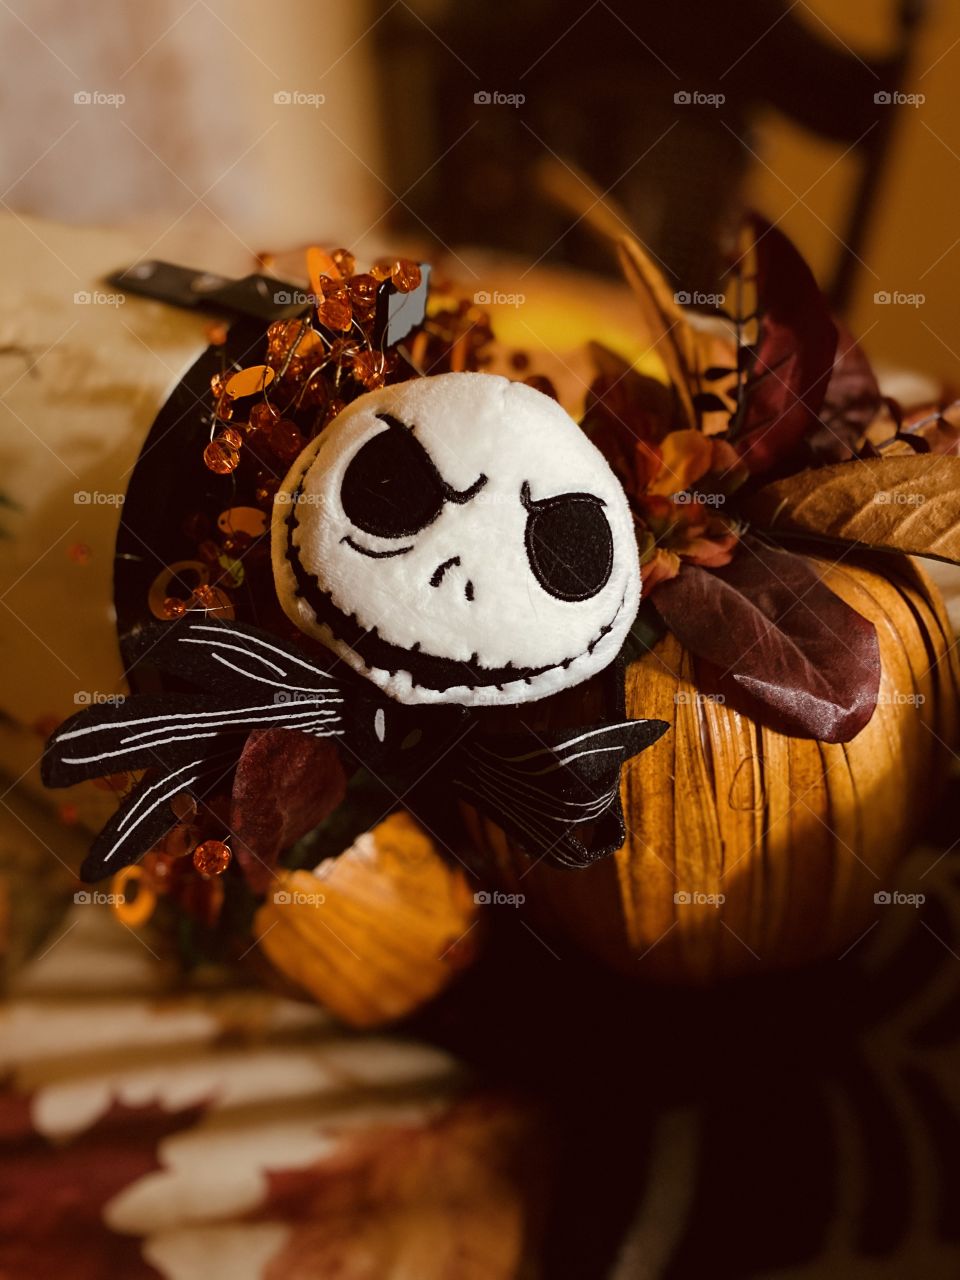 Jack skellington table decoration with pumpkins for Halloween and fall holidays nightmare before Christmas 